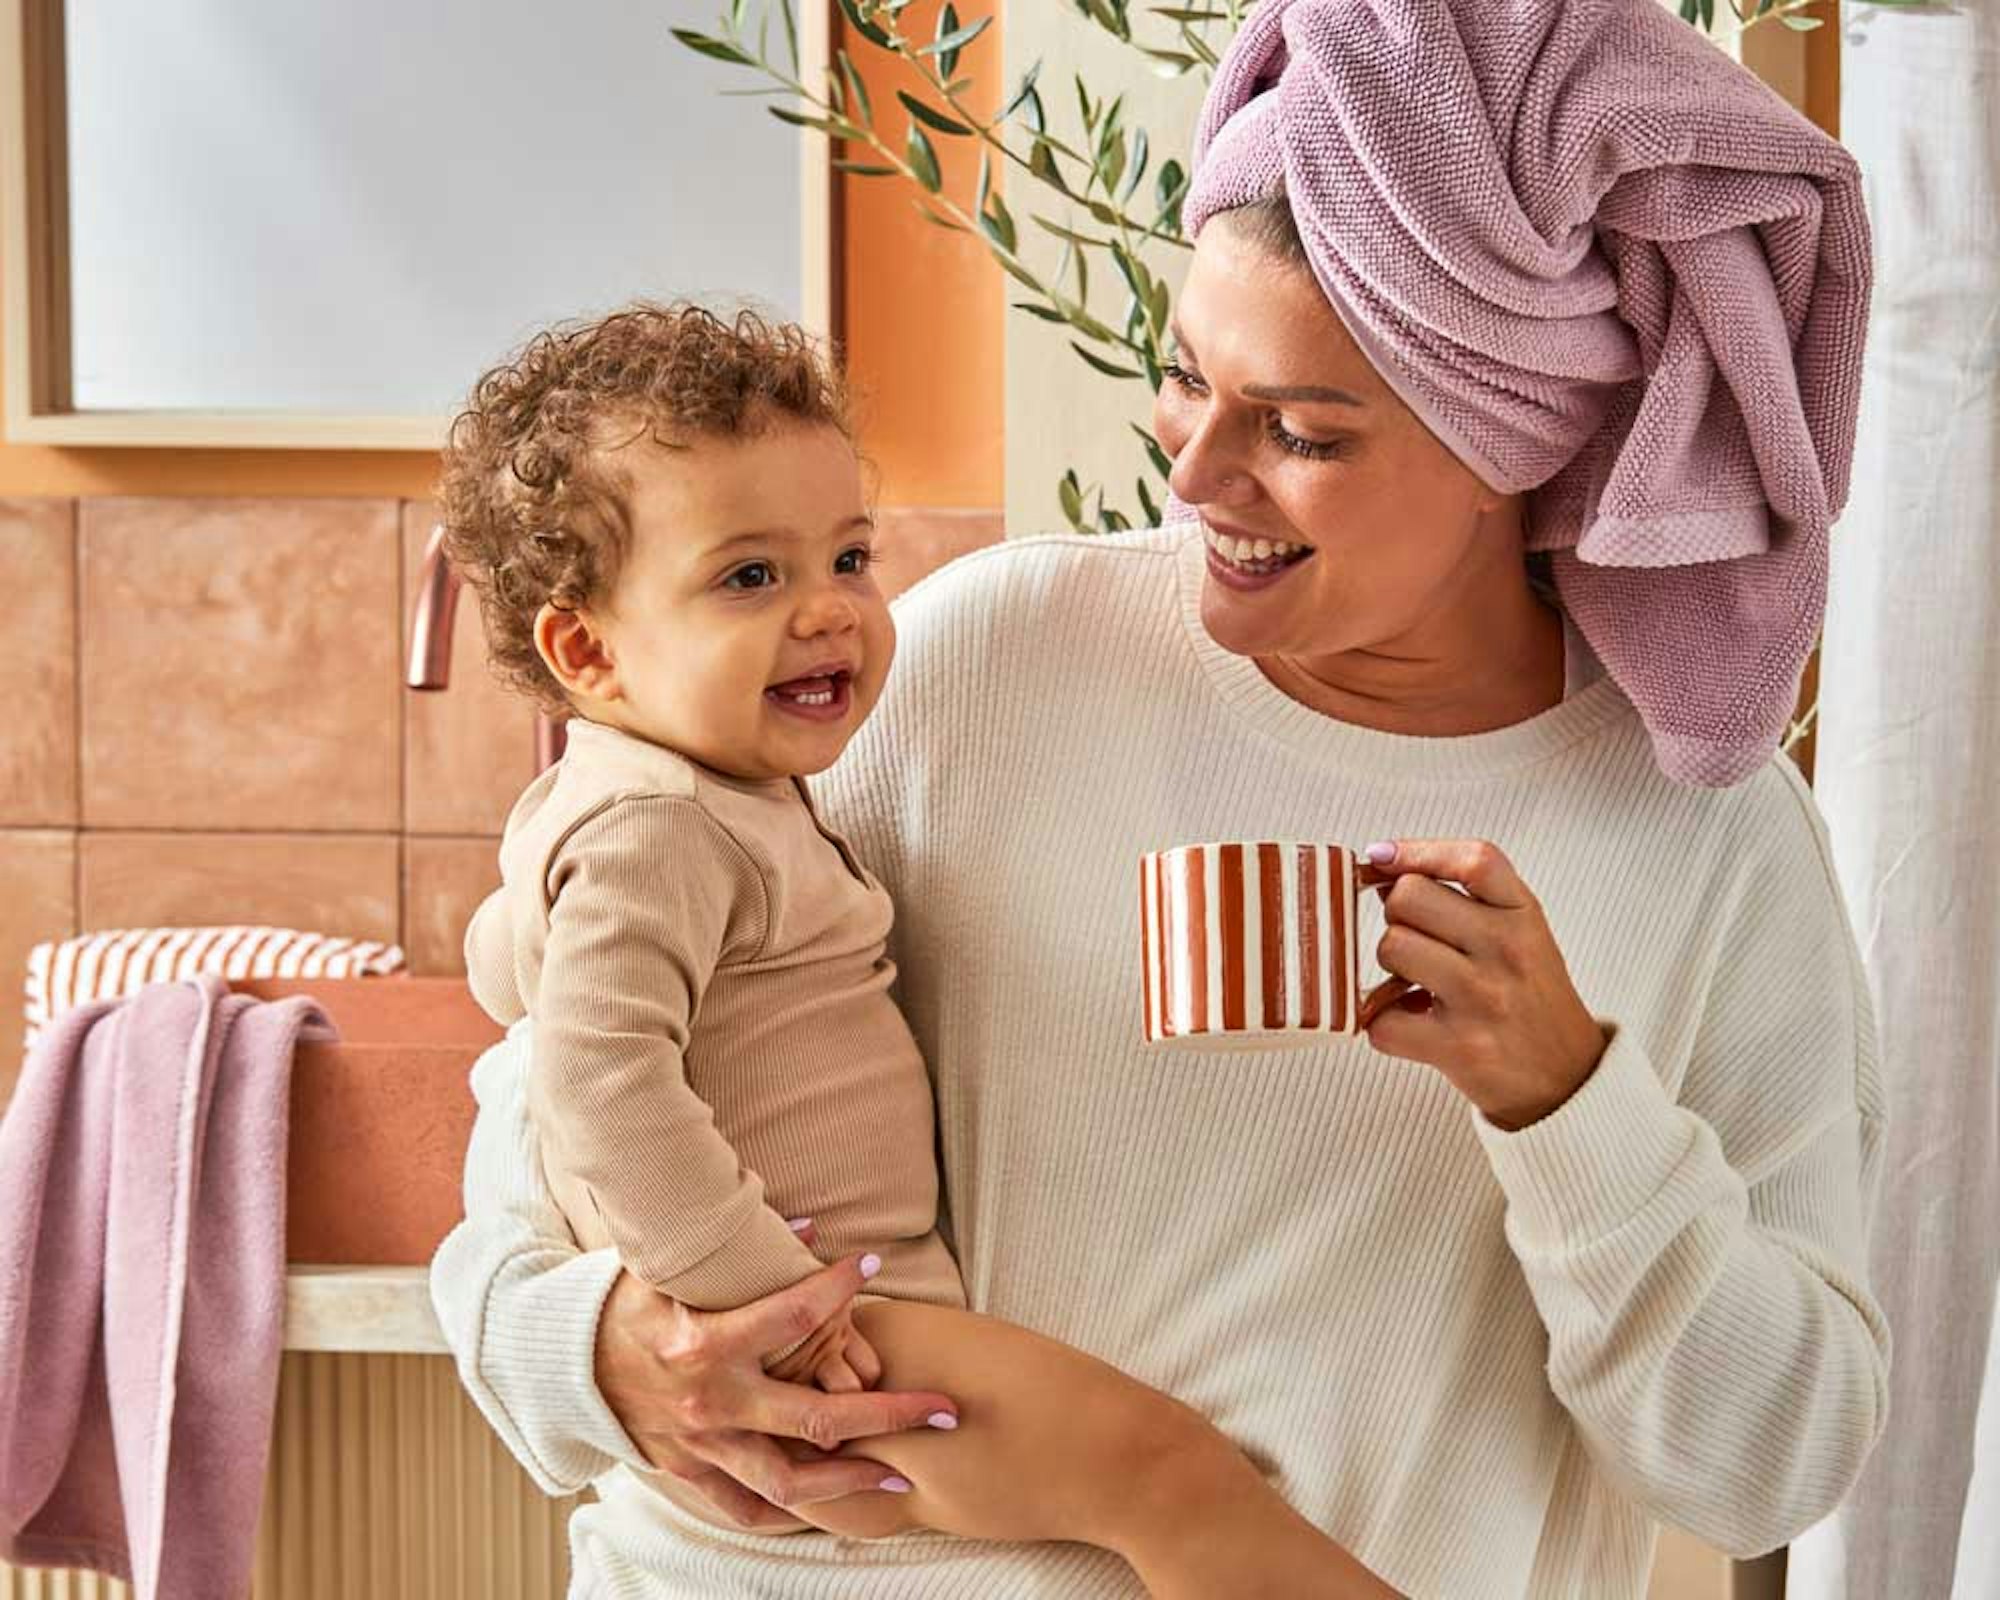 Mother's day gift guide. Mother wearing a towel on their head, holding child and a mug